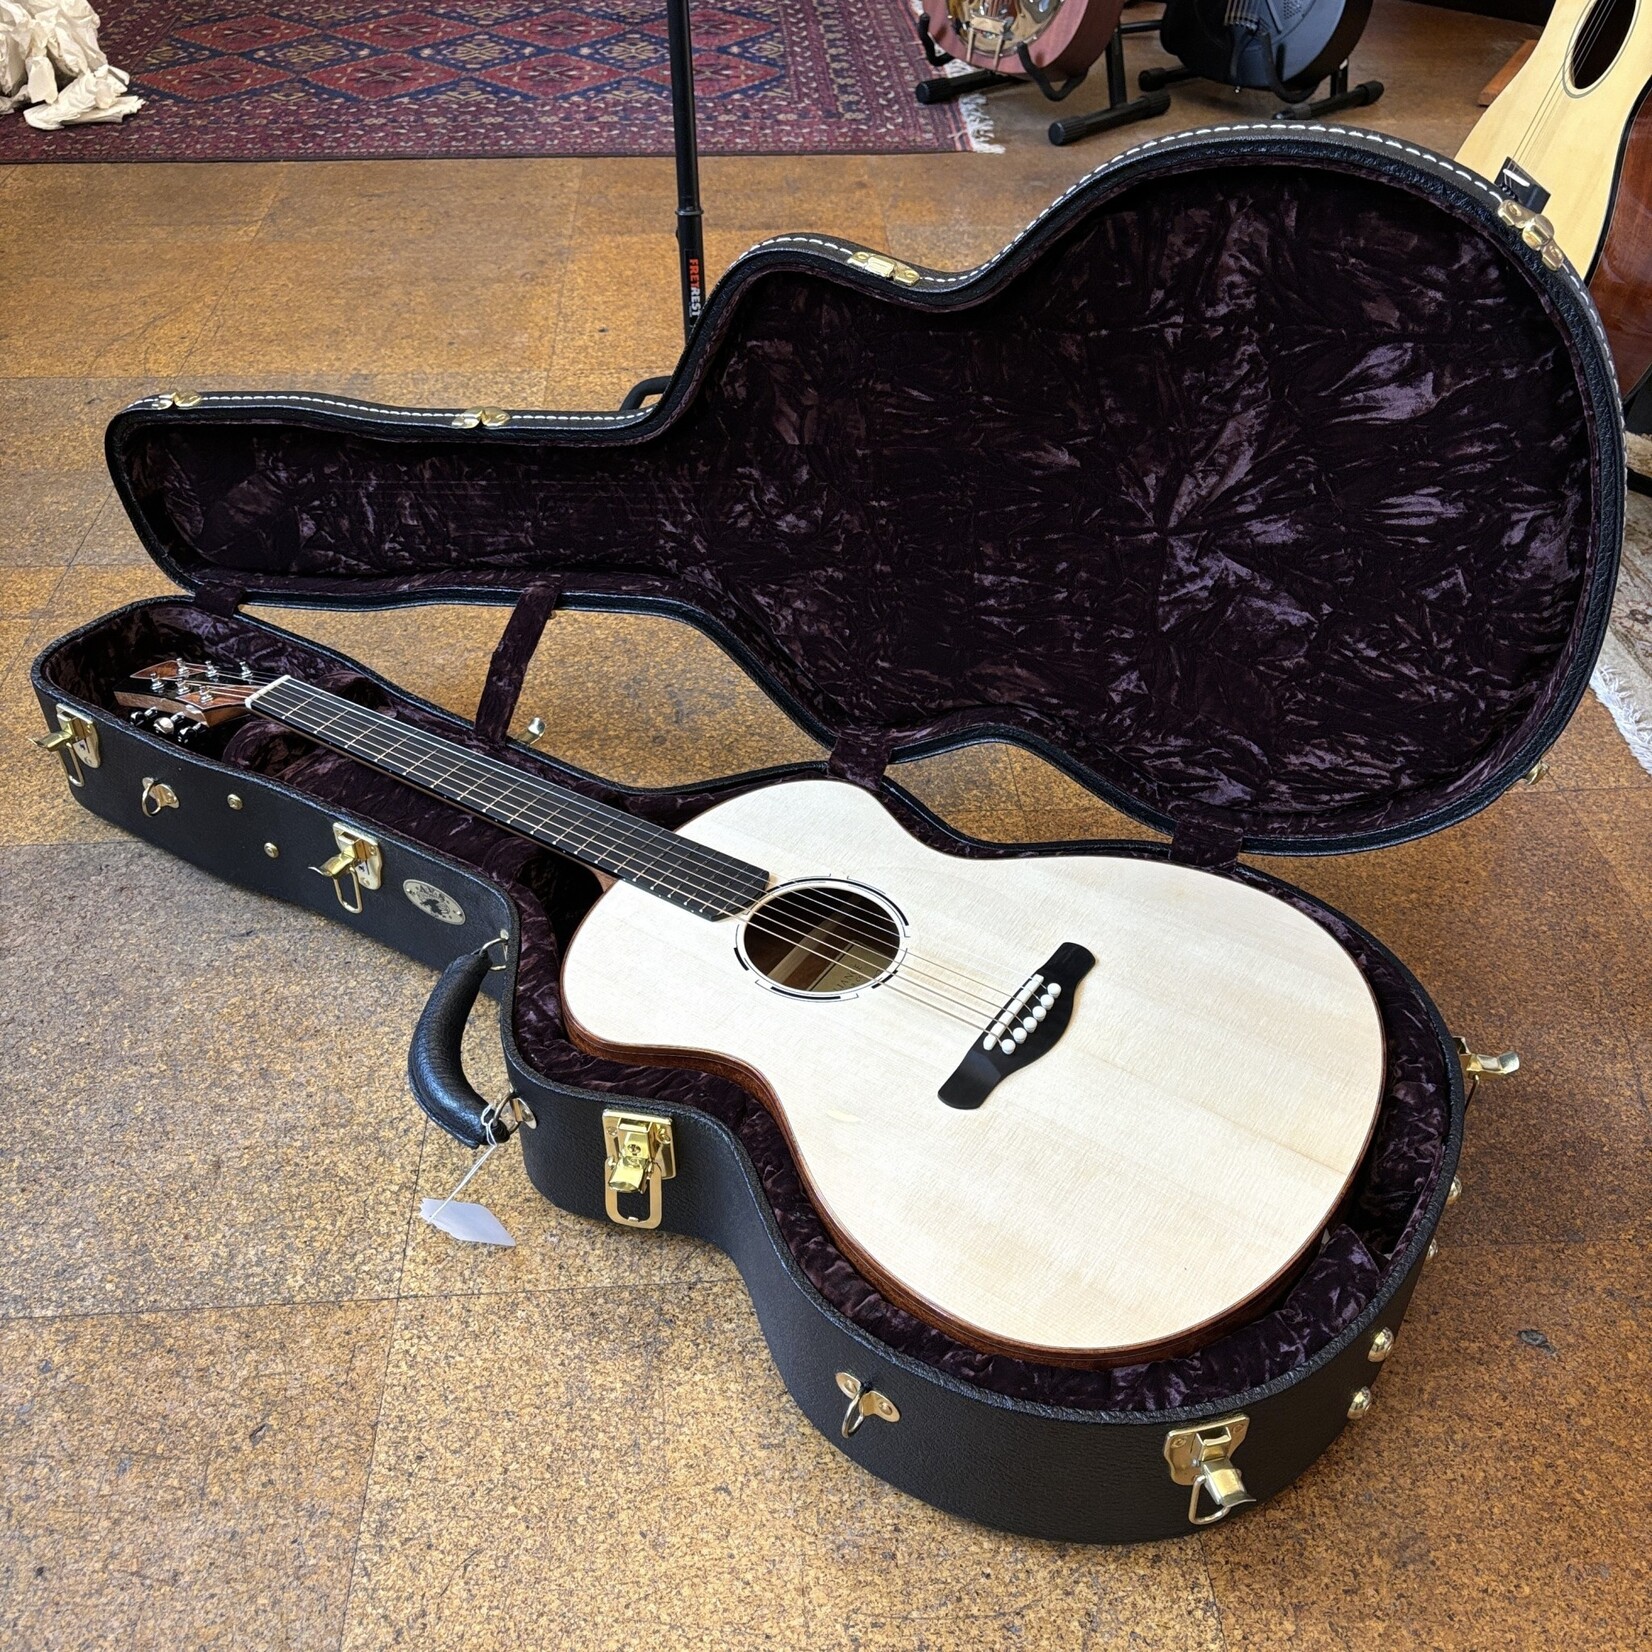 Alliance Alliance (Galloup School) Michigan A-FS 000 Handcrafted Spruce/Curly Mahogany 000 Acoustic Guitar w/Hard Case